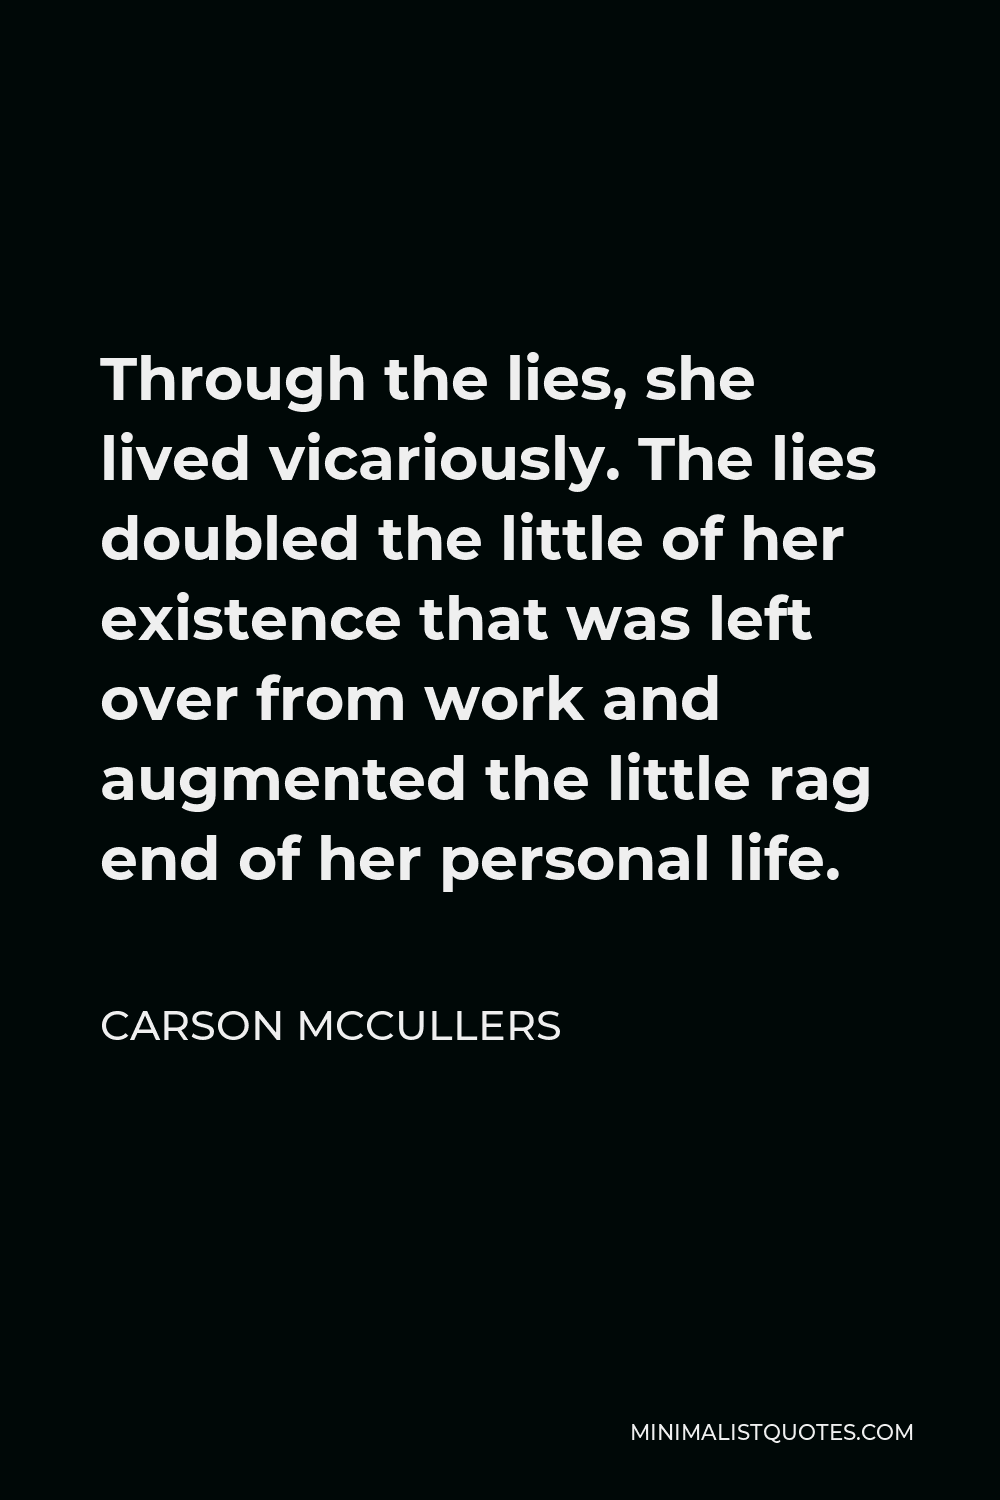 Carson McCullers Quote - Through the lies, she lived vicariously. The lies doubled the little of her existence that was left over from work and augmented the little rag end of her personal life.